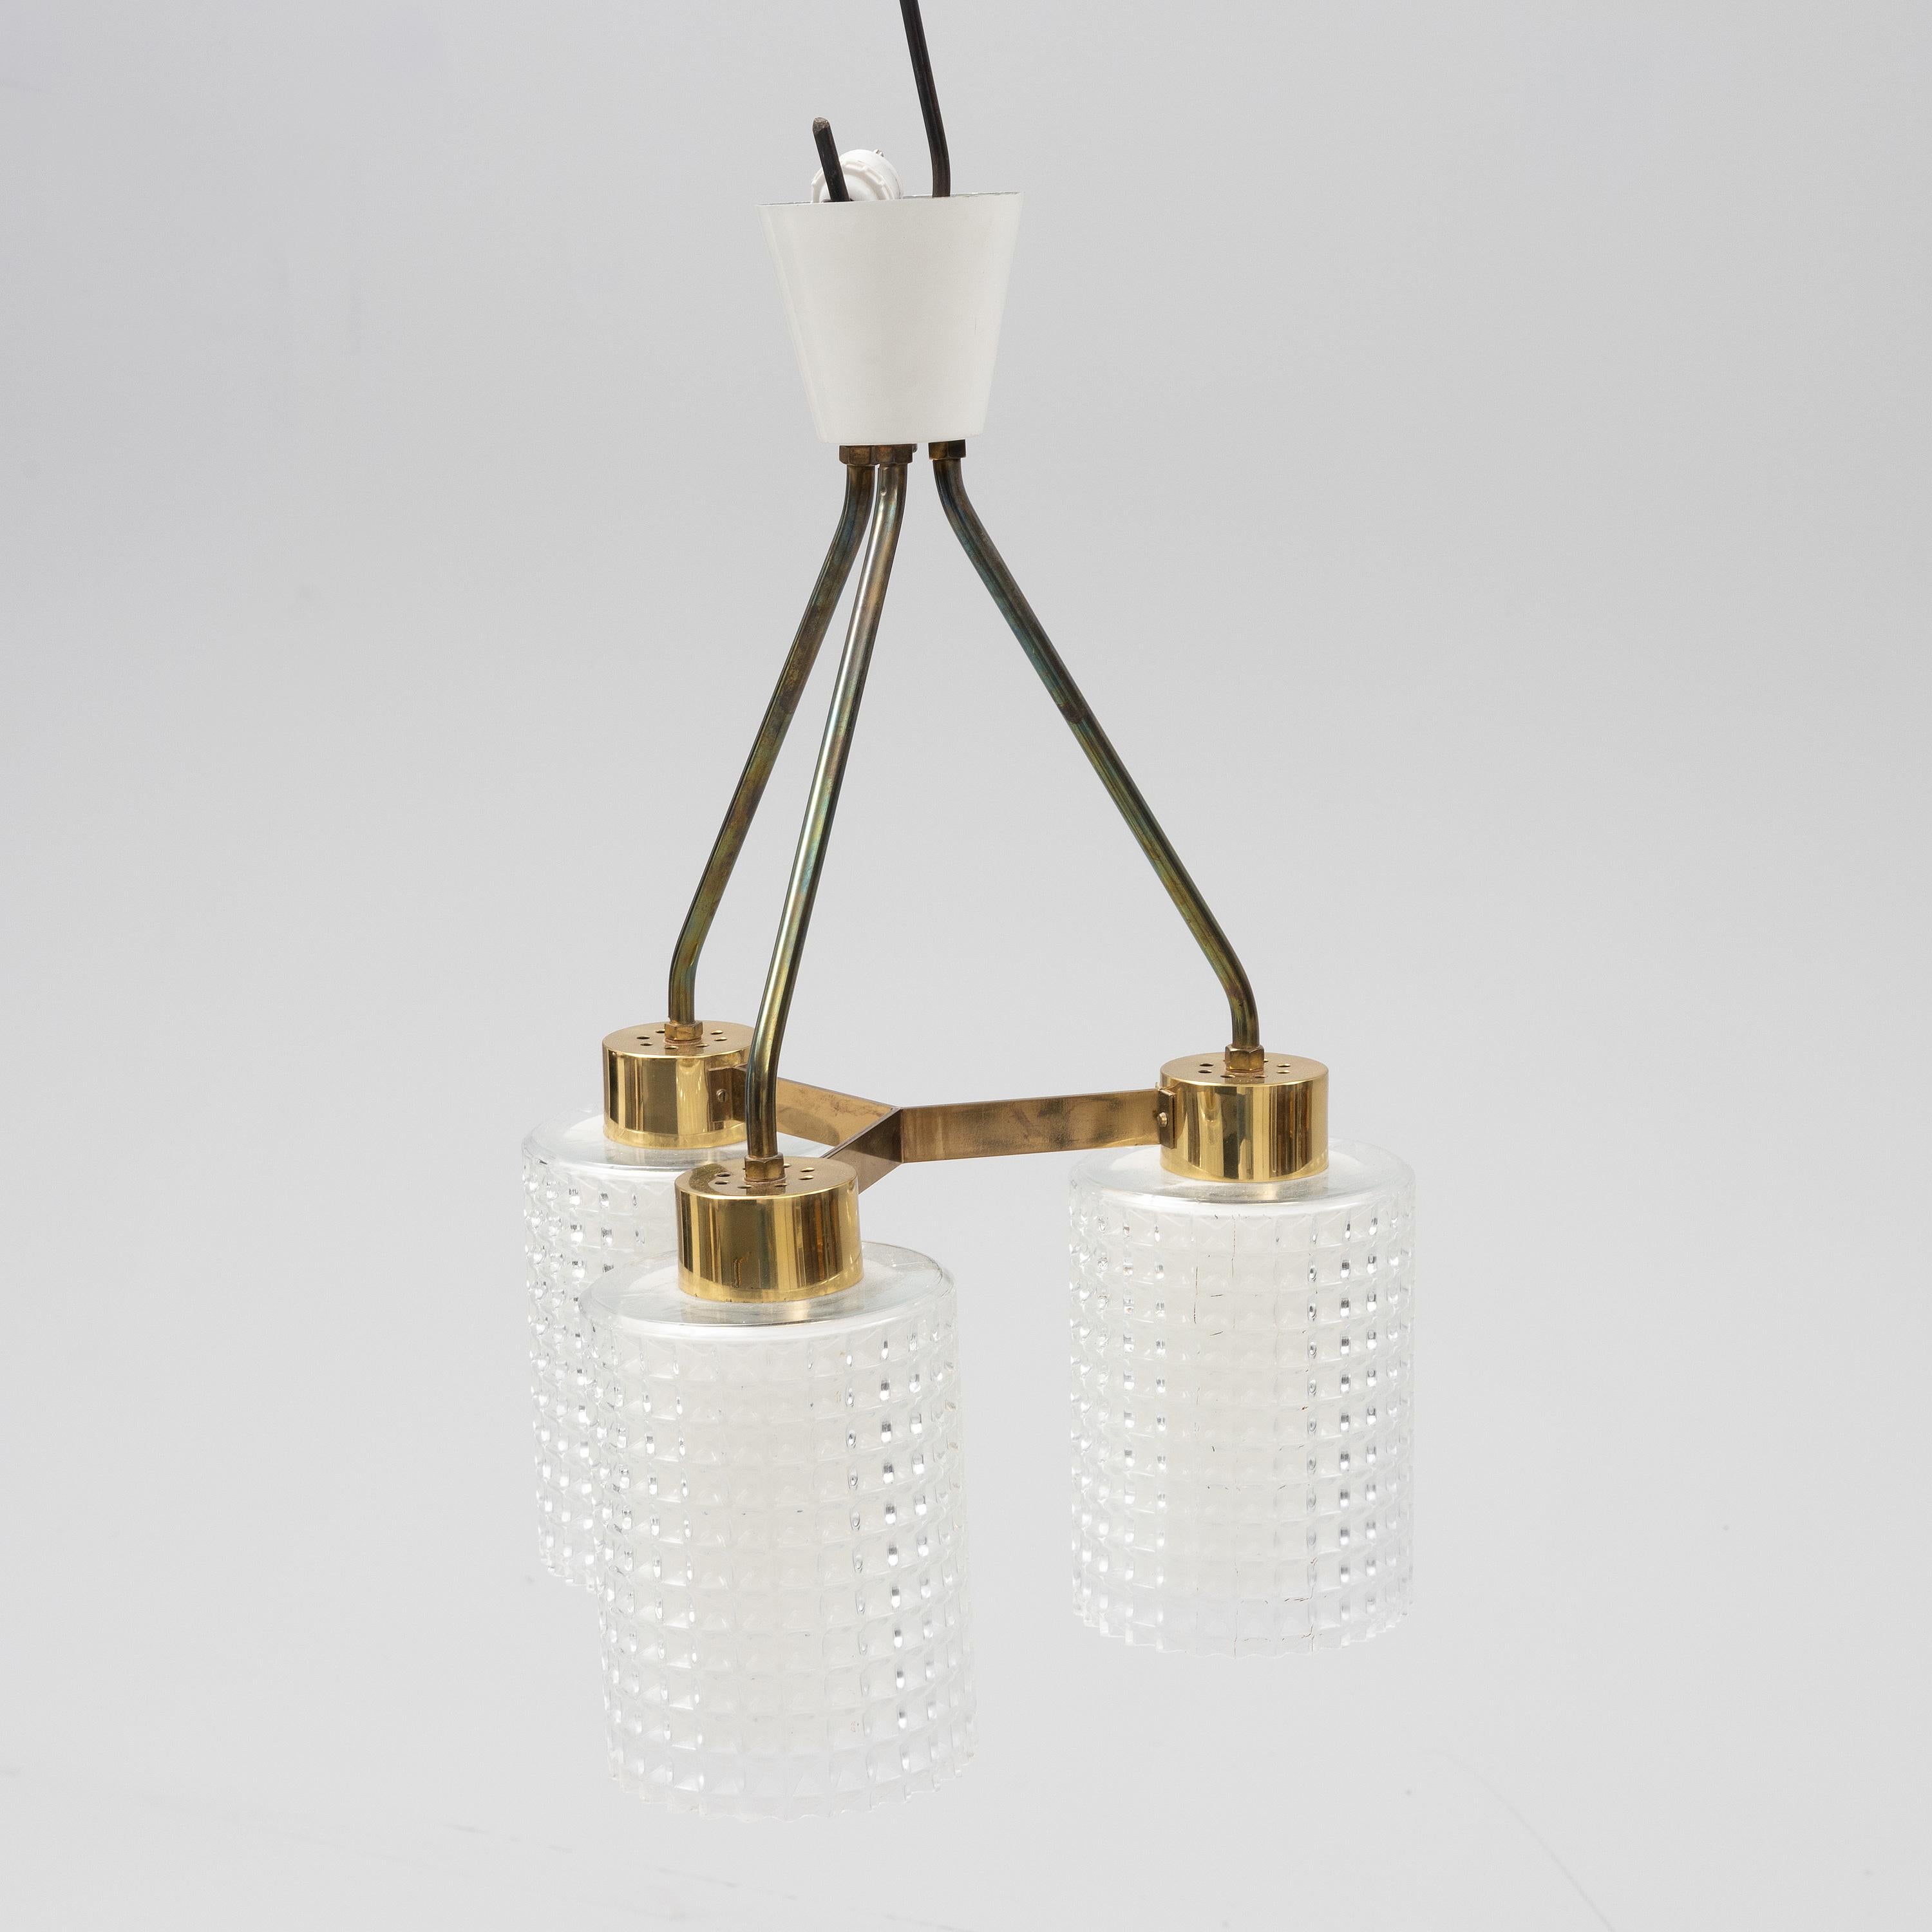 Glass and brass pendant 3 lights by Orrefors Sweden, 1960

Good overall condition.